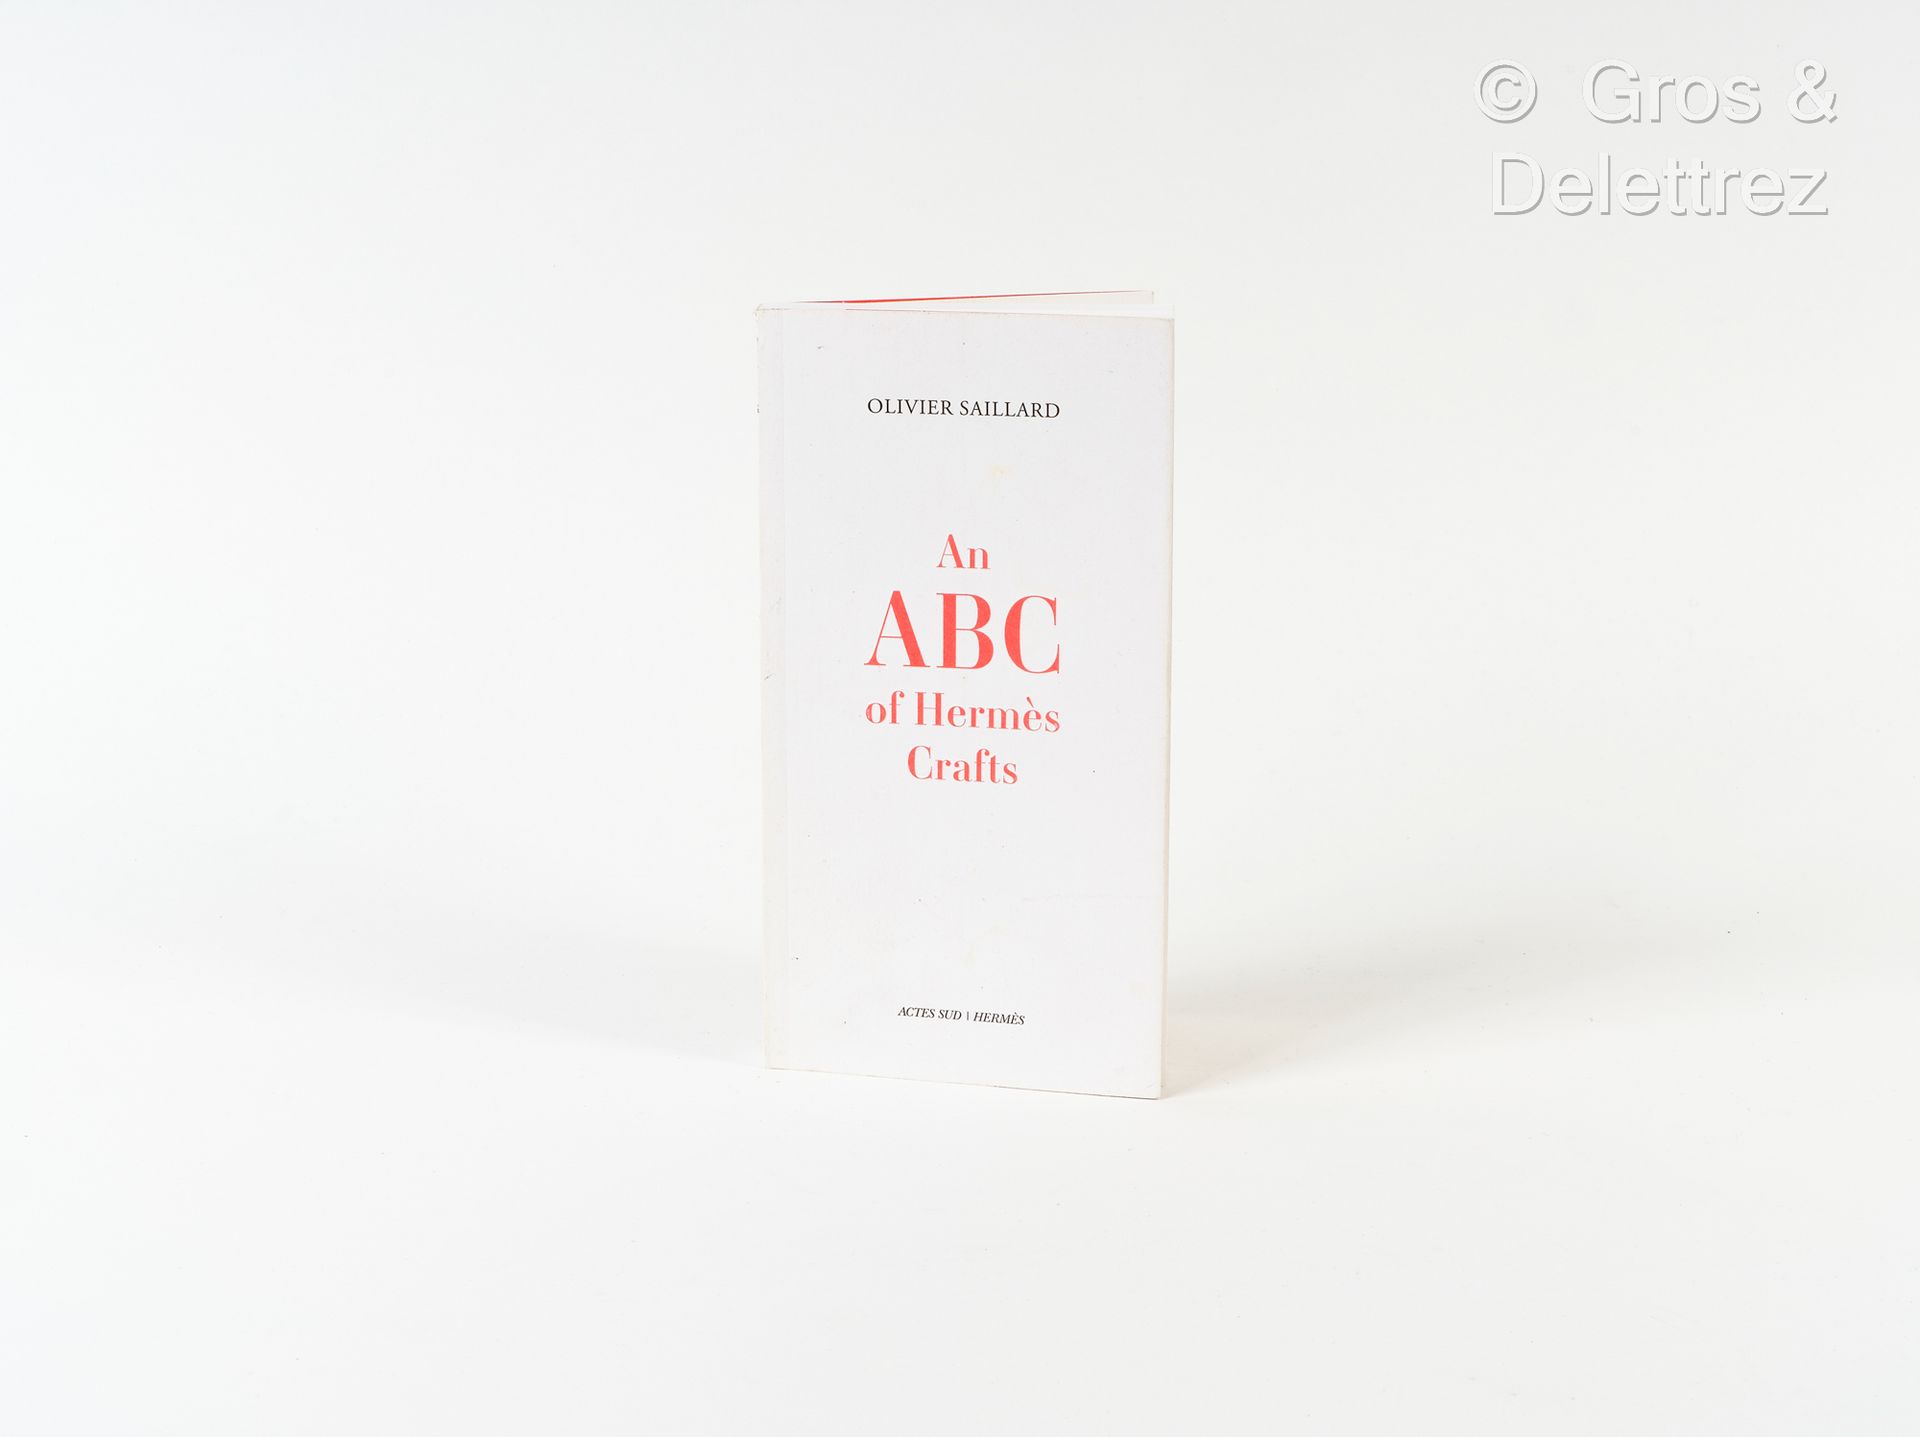 Null Book "An ABC of Hermes Crafts" by Olivier Saillard published by Actes Sud 2&hellip;